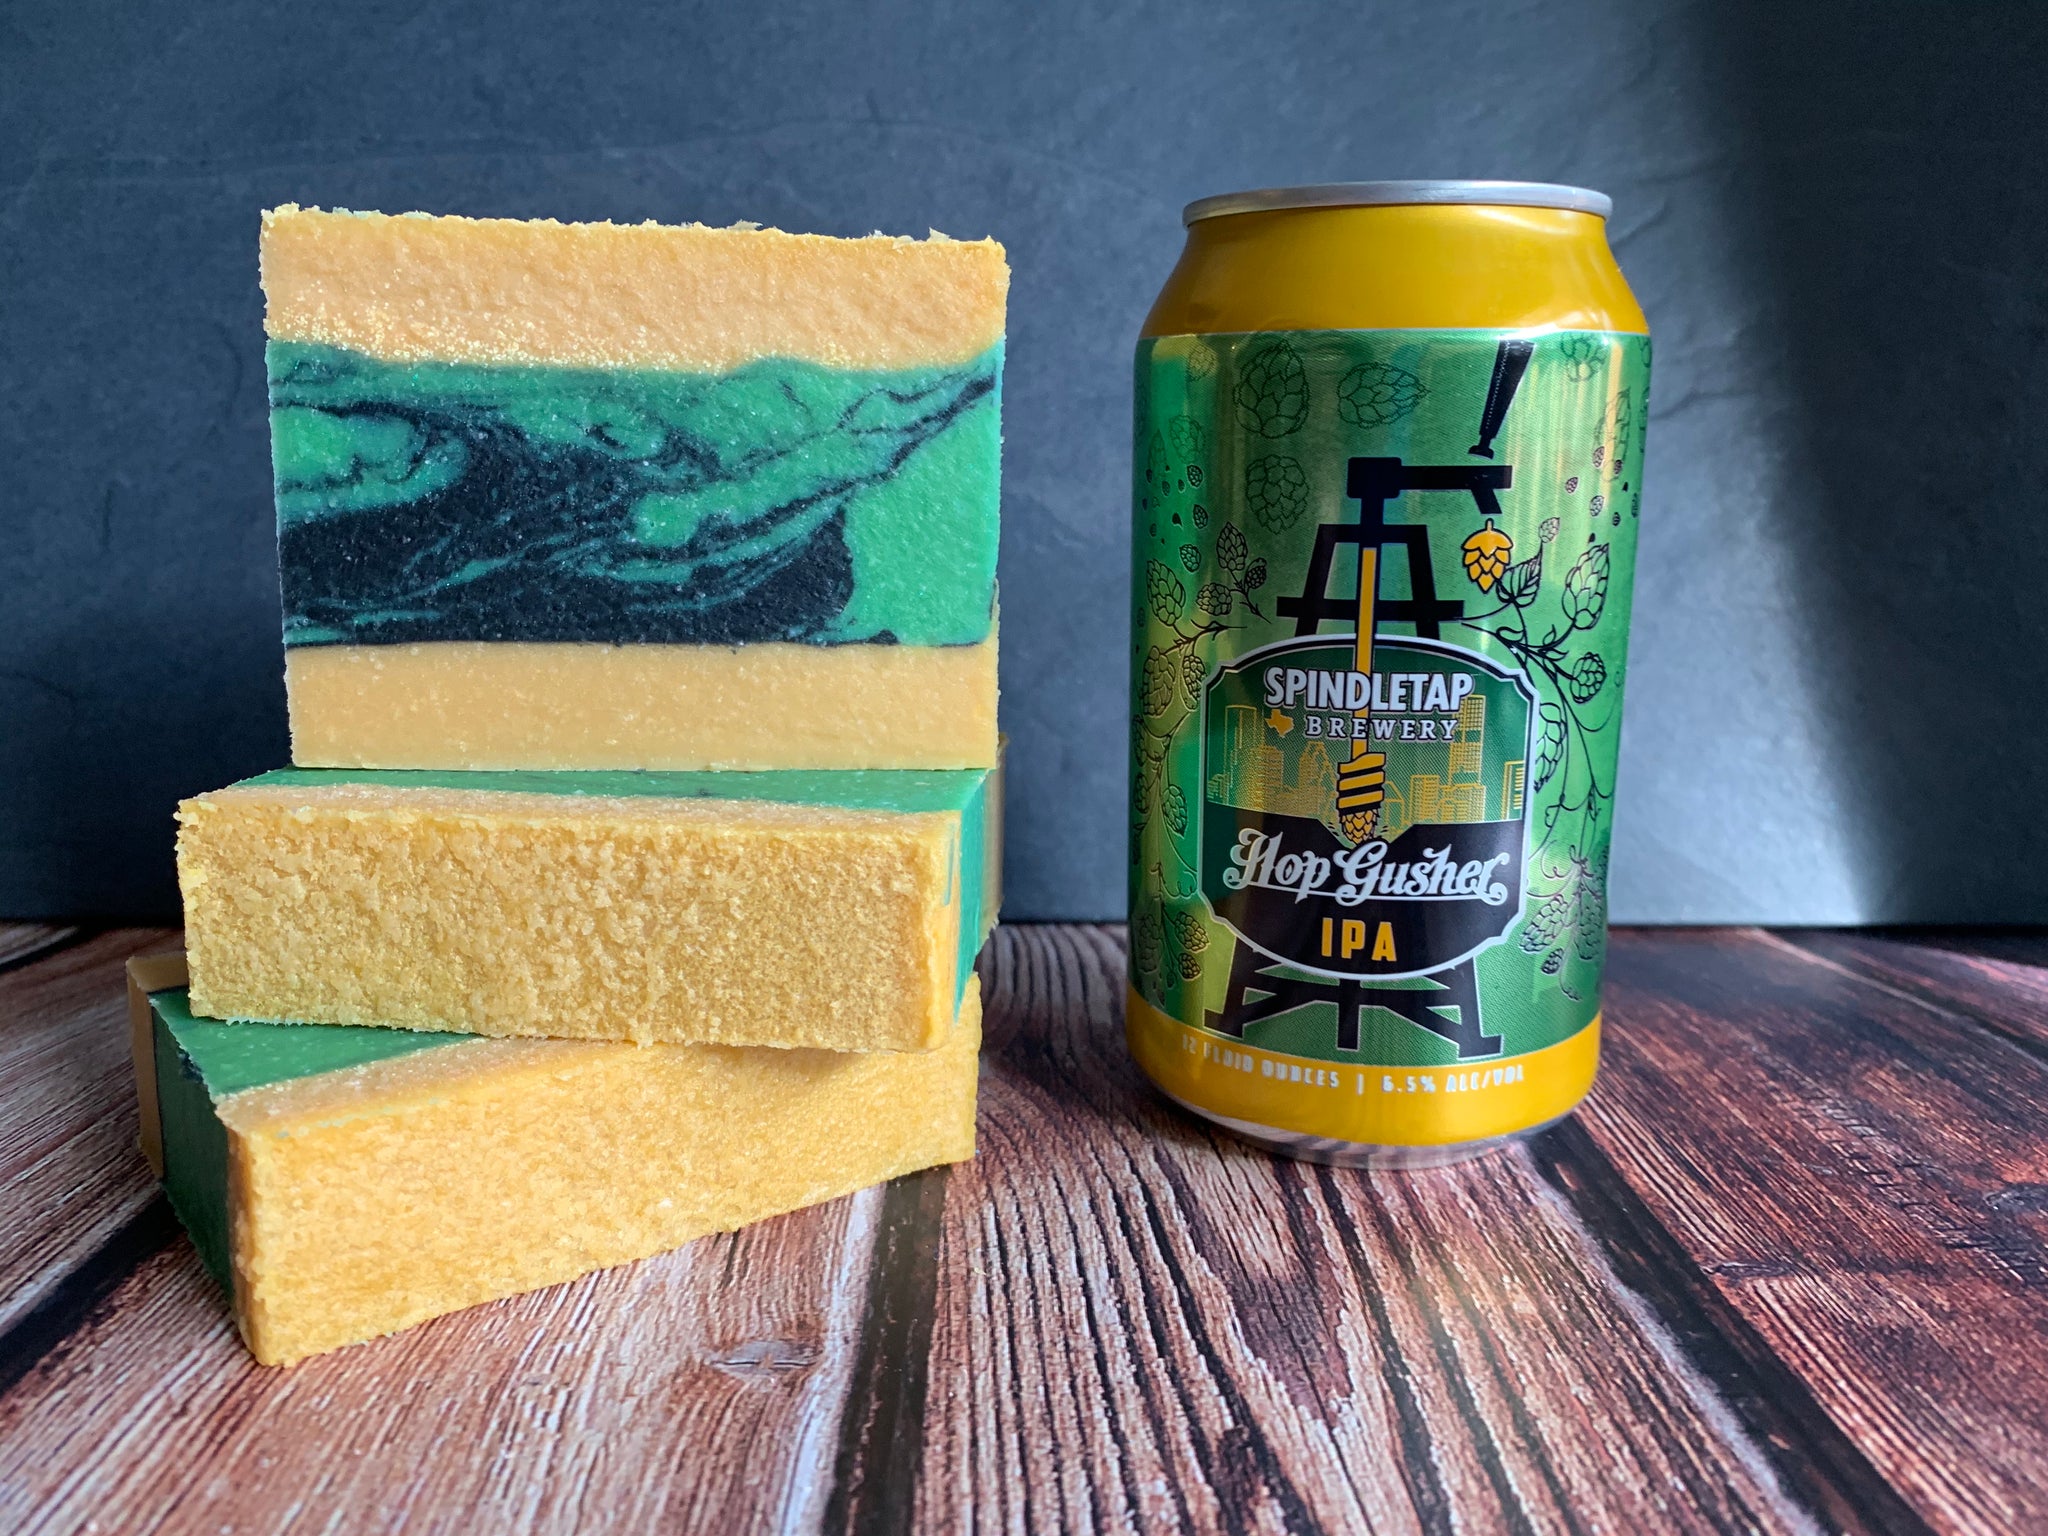 yellow black green craft beer soap handmade in texas with hop gusher ipa from Spindletap Brewery houston texas craft brewery craft beer soap for him with activated charcoal lemon essential oil spunkndisorderly soaps